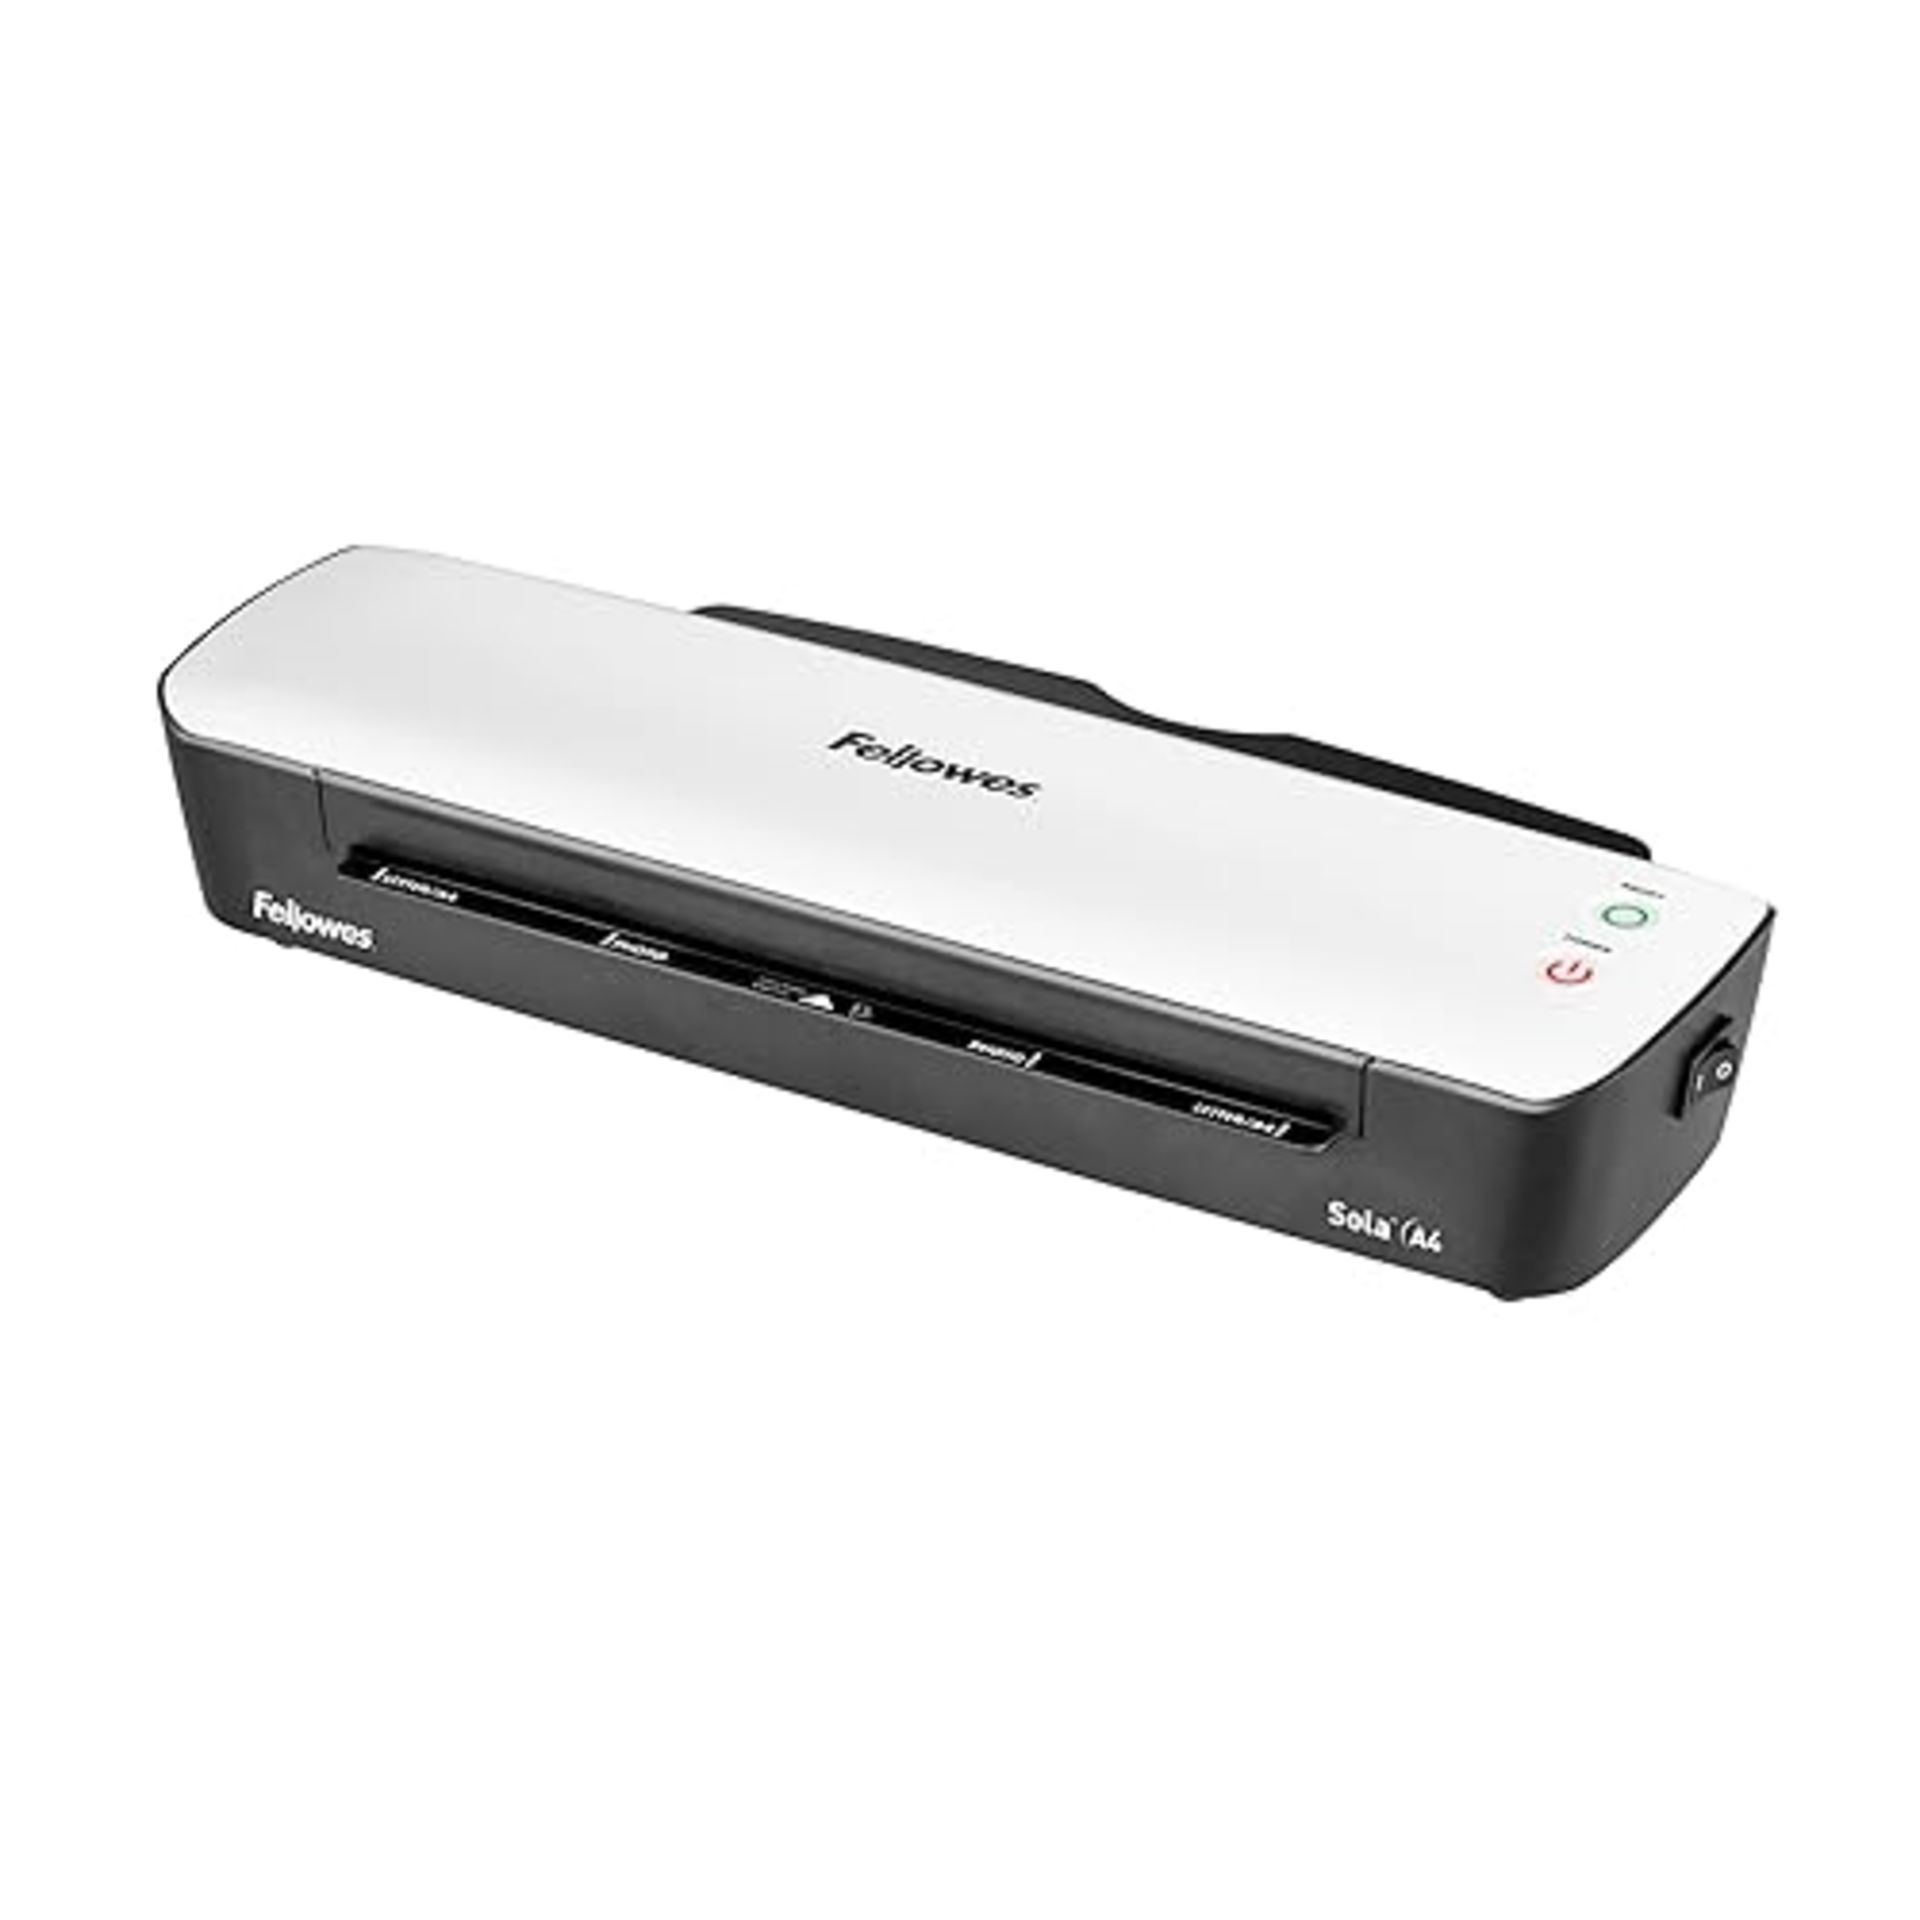 Fellowes Sola A4 Laminator Machine for Home Use - Fast 4 Minute Warm Up Time with Auto Shut Off Fea